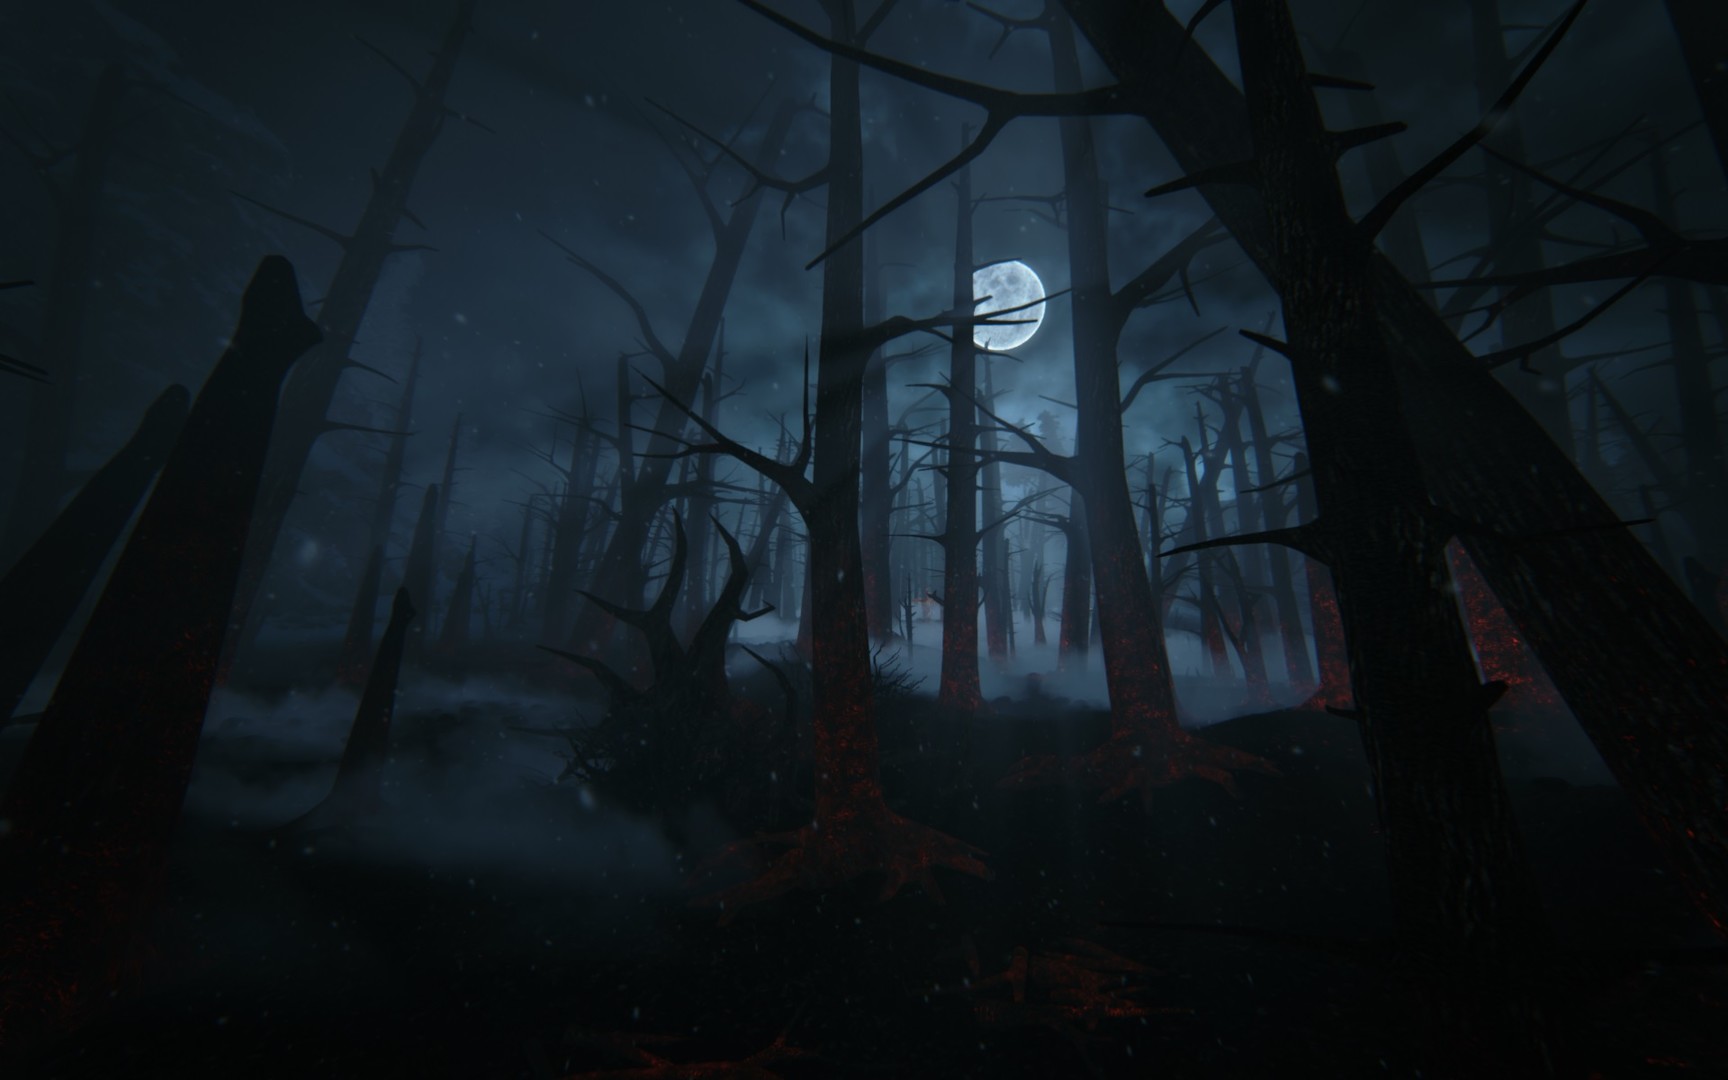 Polish Horror-Thriller Kholat is Now Available on PS4